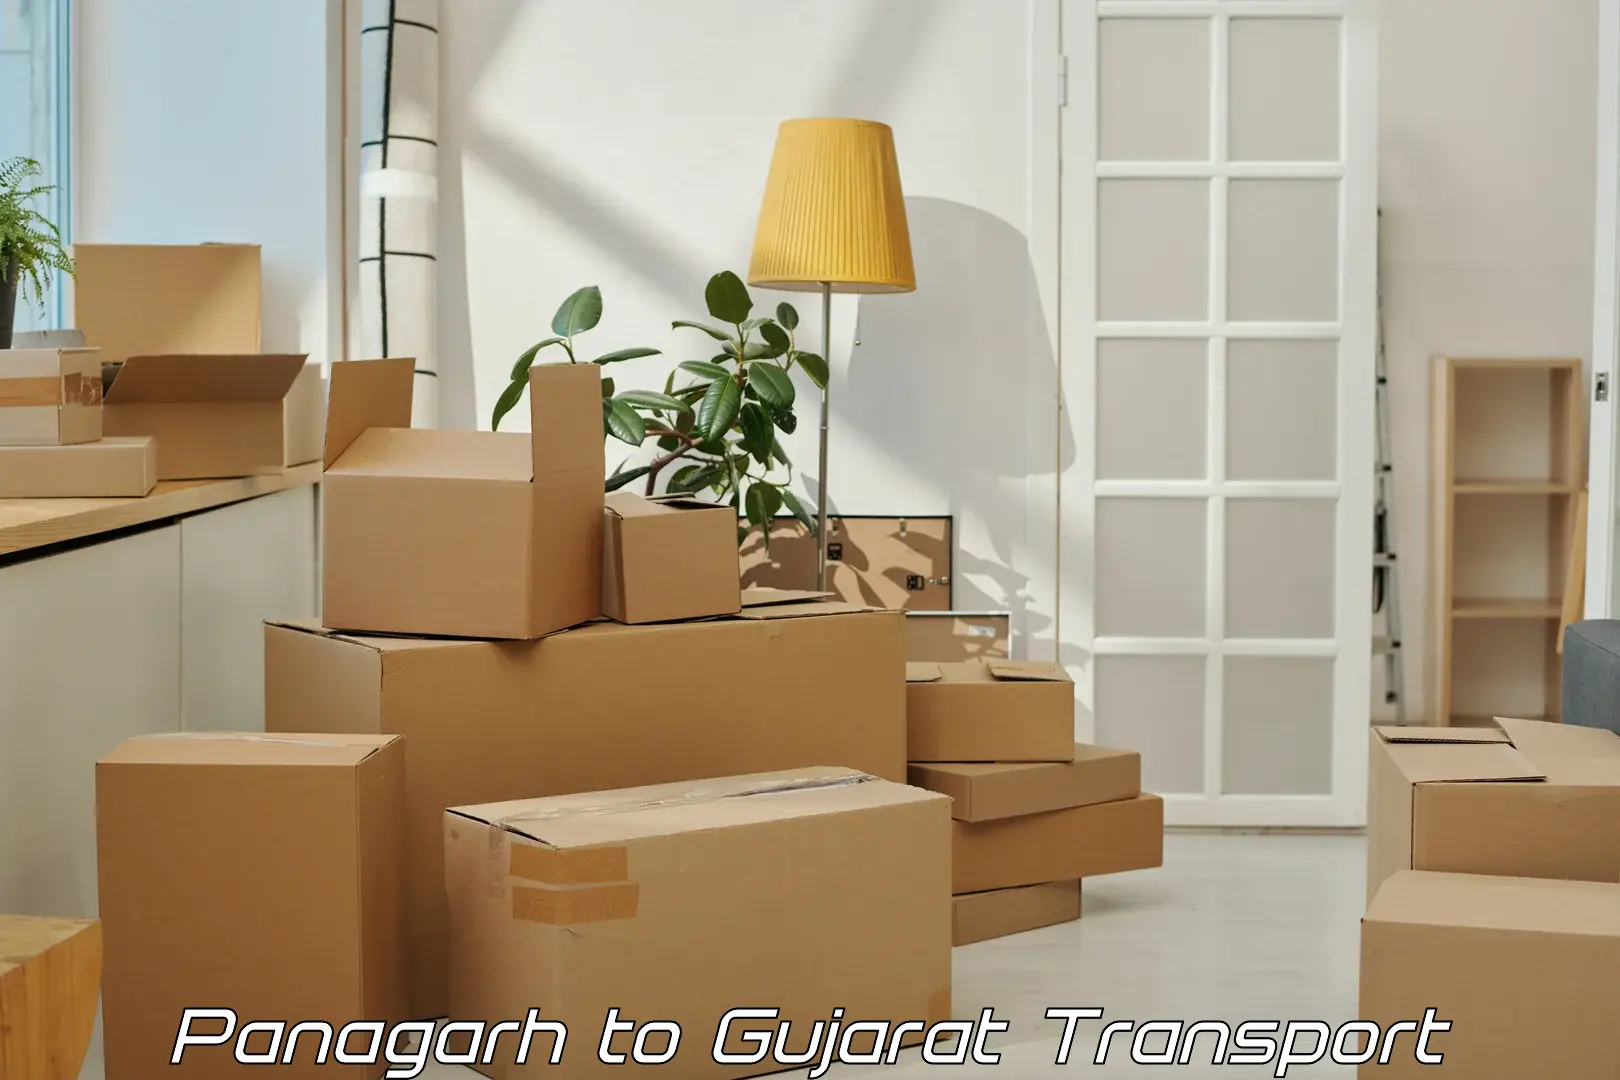 Part load transport service in India Panagarh to Kachchh